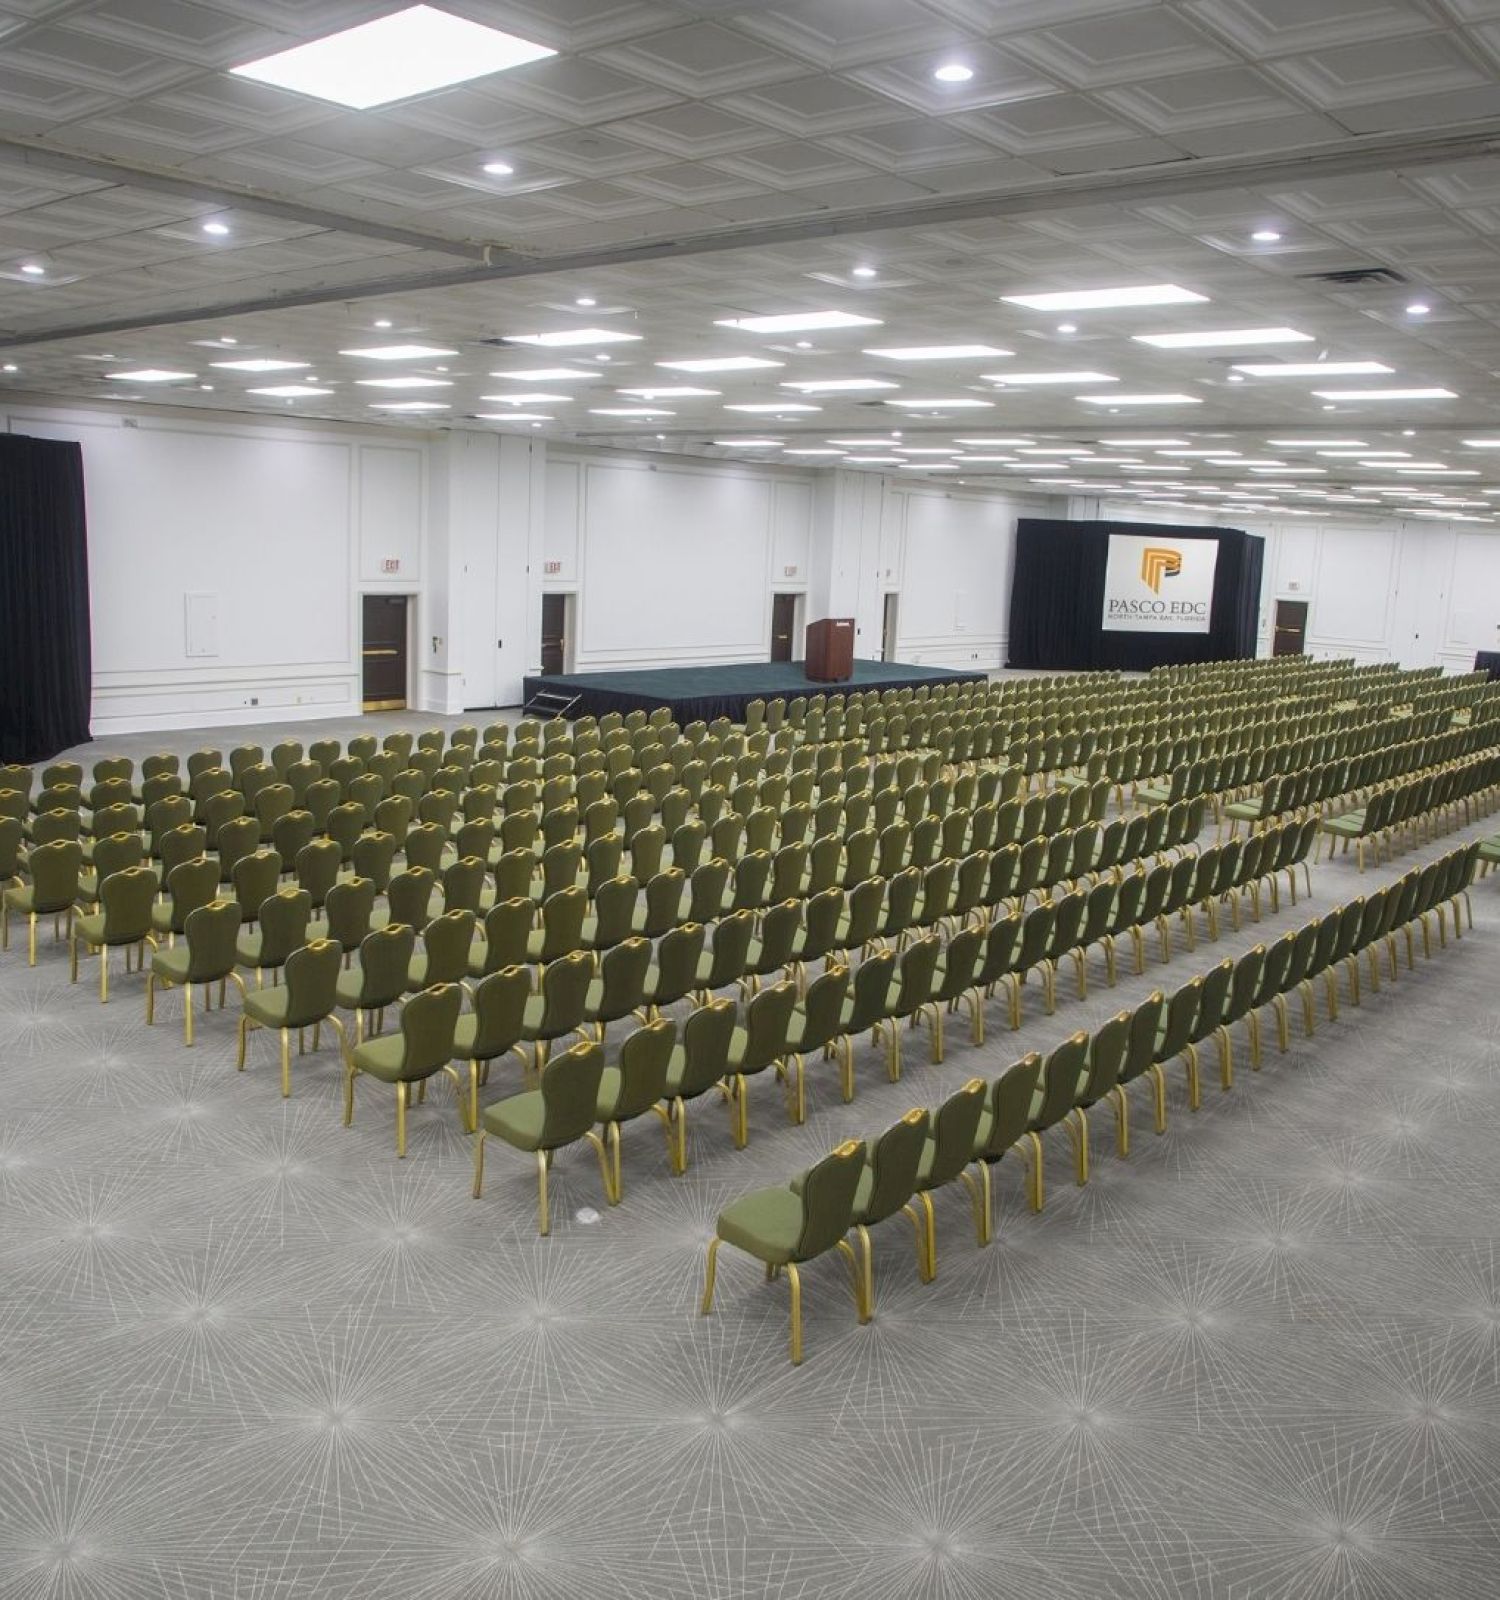 A large conference room set up with multiple rows of green chairs facing two projection screens displaying 